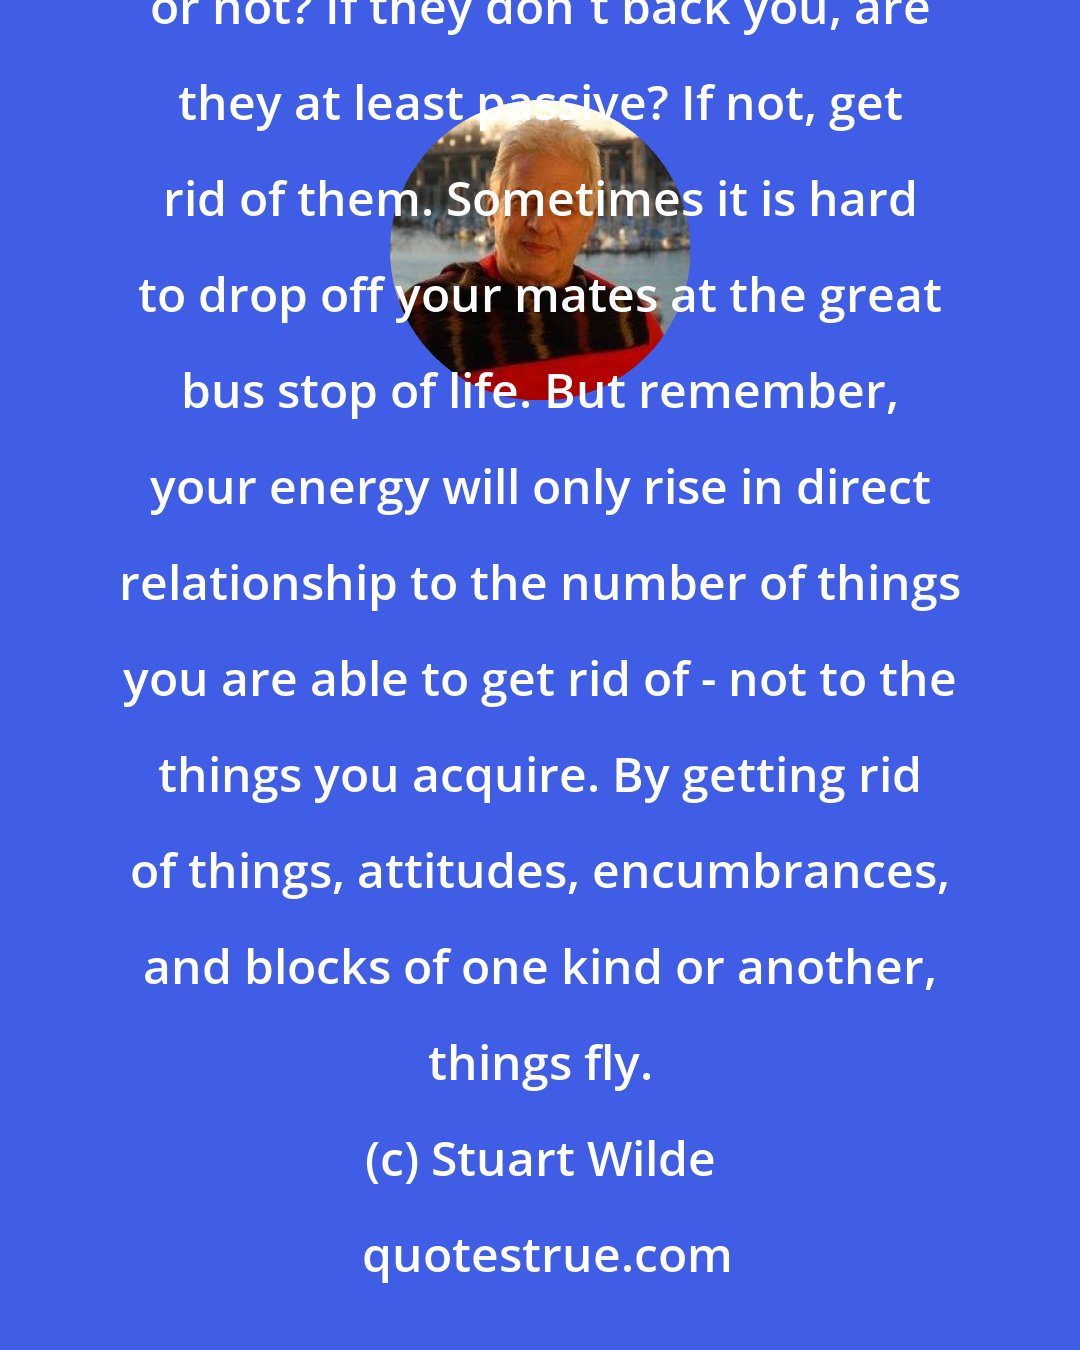 Stuart Wilde: Next, take a look at the quality of the people who surround you. Do these people back you emotionally, or not? If they don't back you, are they at least passive? If not, get rid of them. Sometimes it is hard to drop off your mates at the great bus stop of life. But remember, your energy will only rise in direct relationship to the number of things you are able to get rid of - not to the things you acquire. By getting rid of things, attitudes, encumbrances, and blocks of one kind or another, things fly.